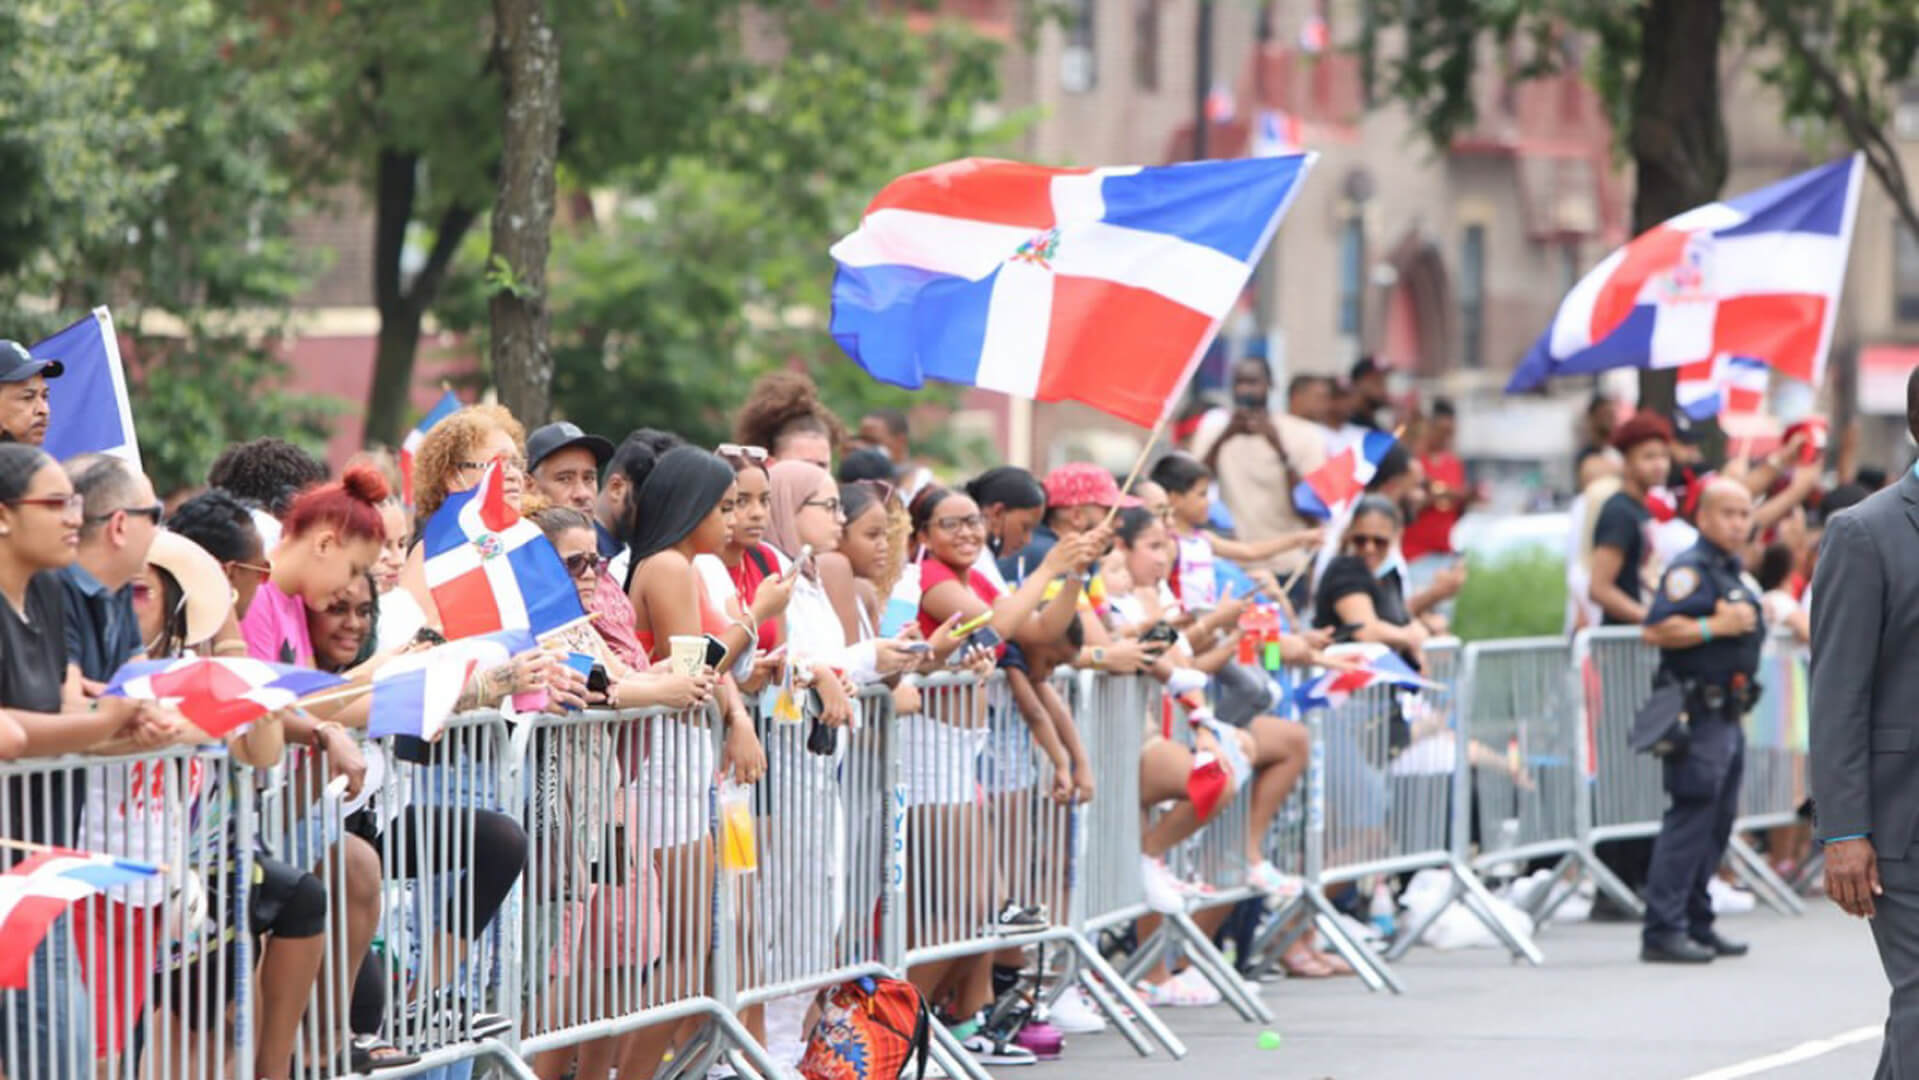 How We Rebranded the Bronx Dominican Parade Hero _D_S Agency _ Branding and Advertising Agency NYC